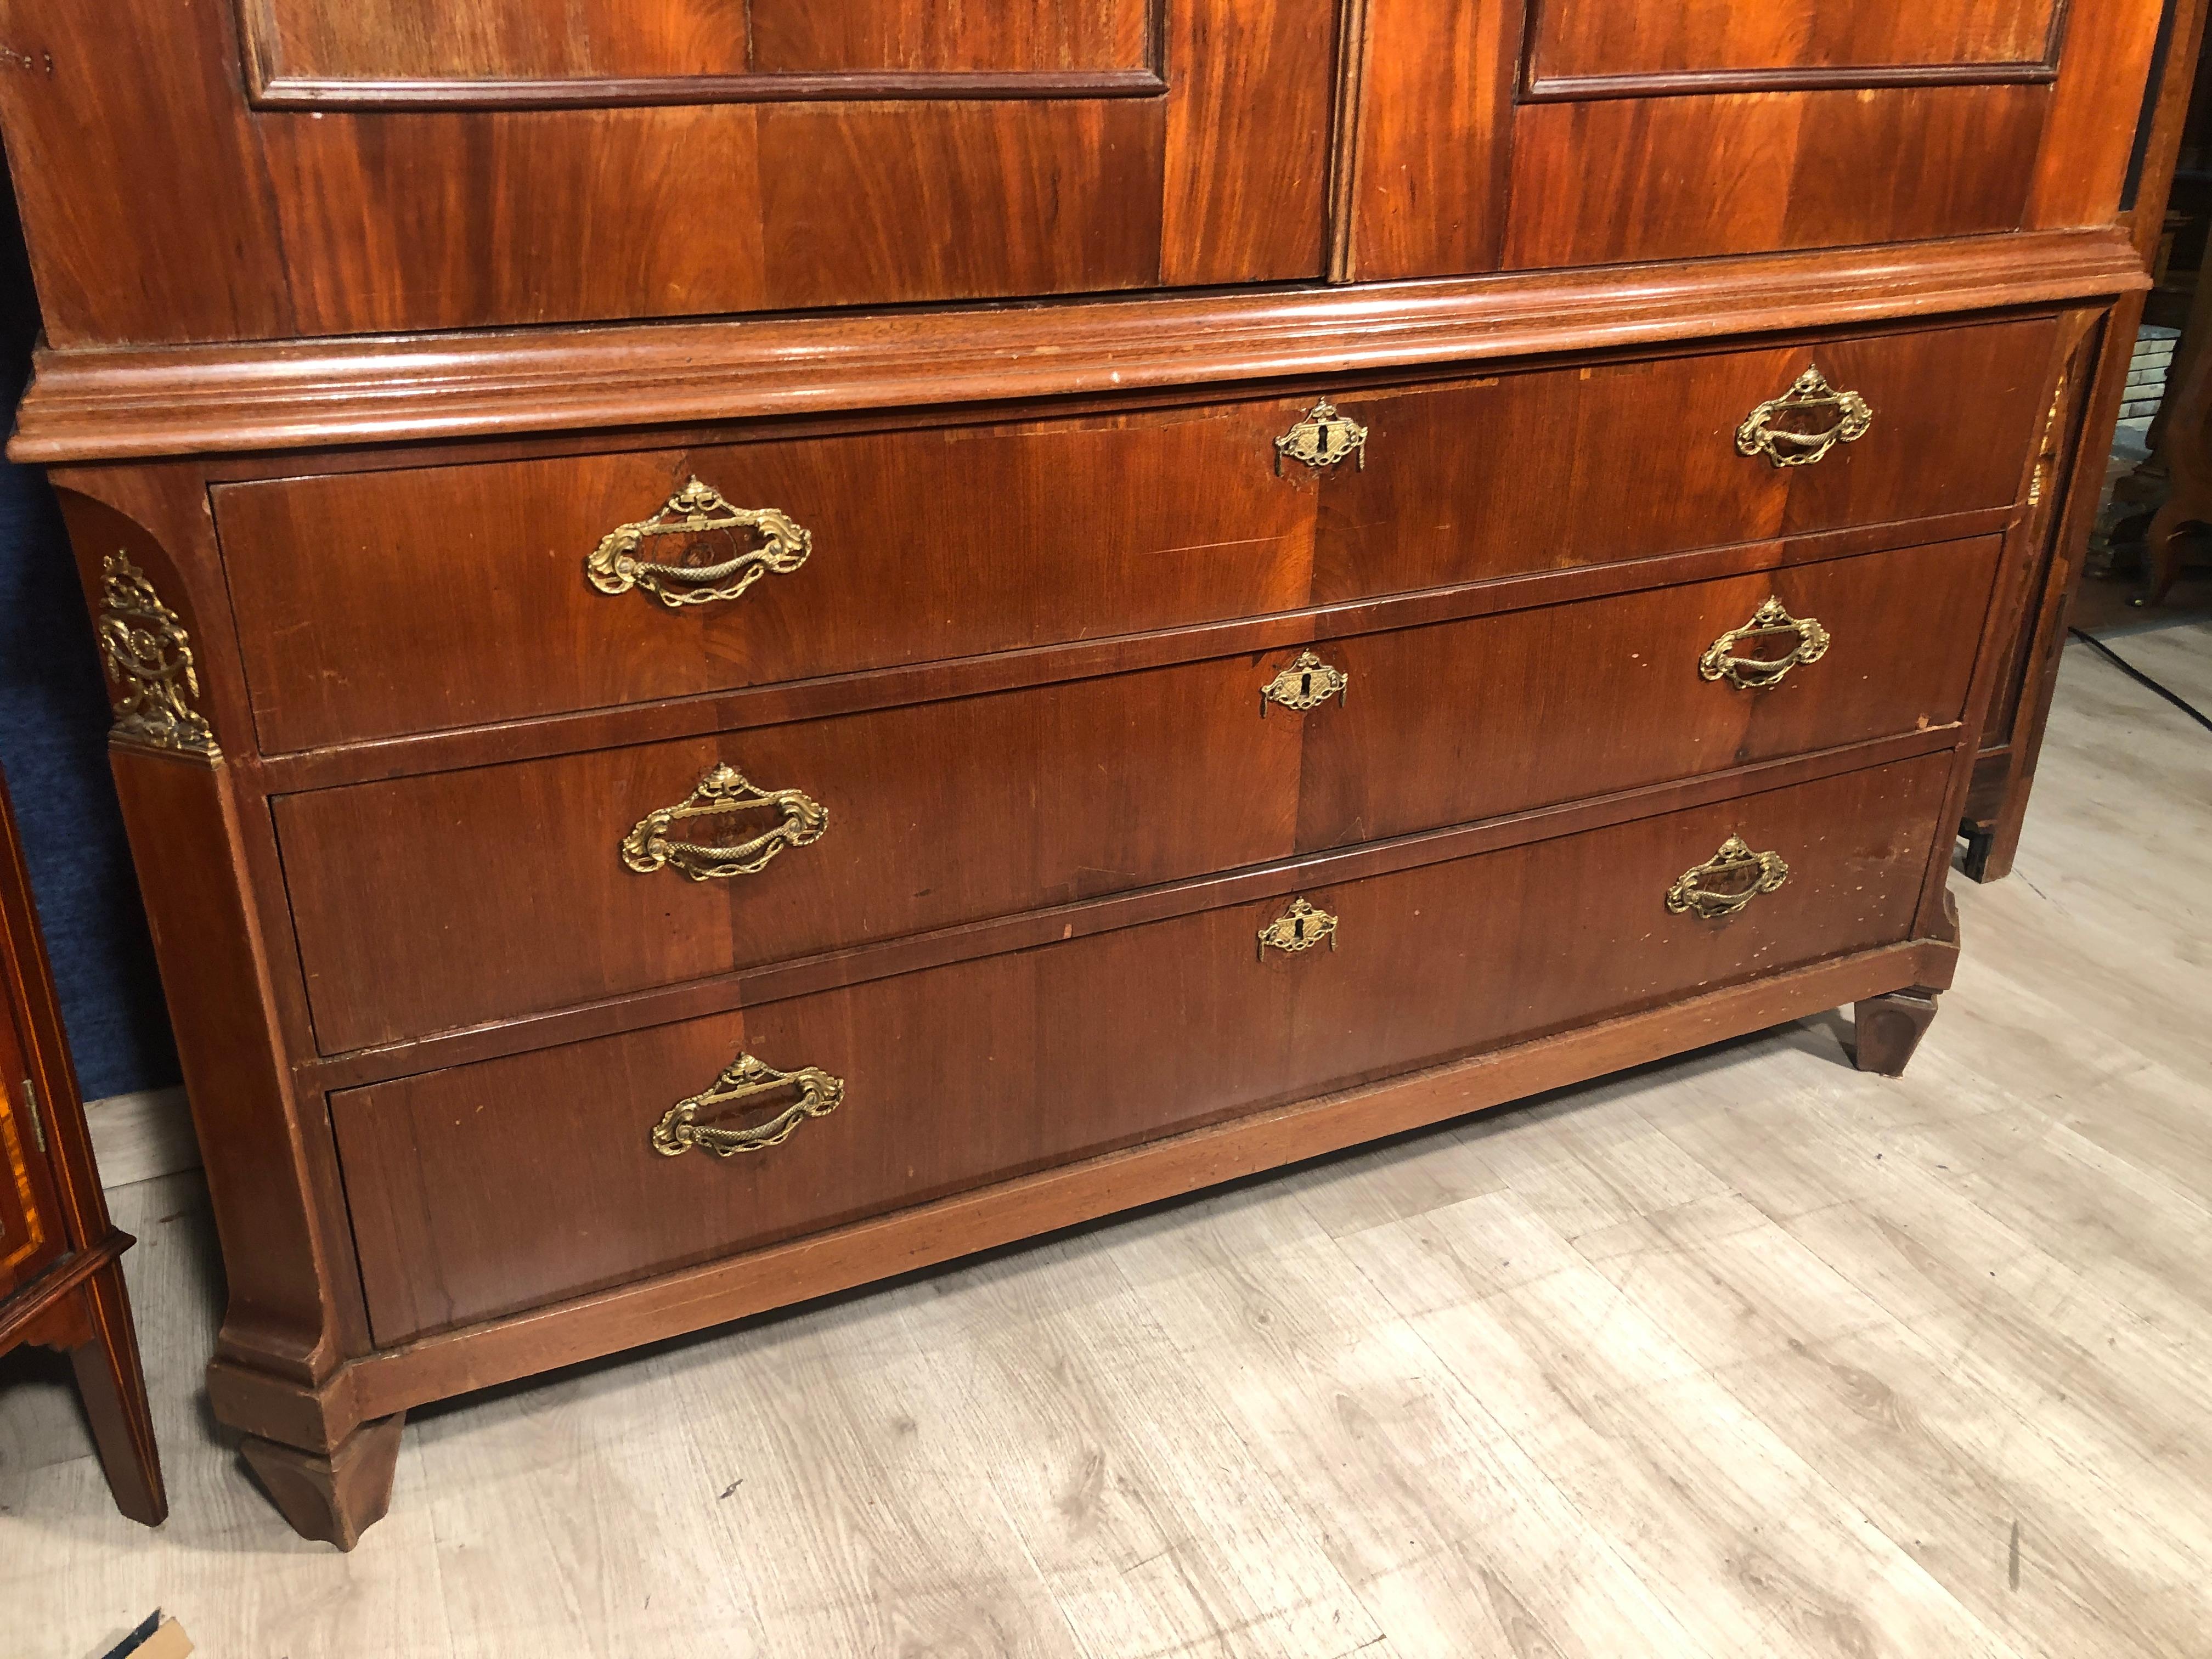 Trumeau wardrobe of Dutch origin, excellent quality and carvings of excellent workmanship, furniture that reflects the build quality of the Dutch furniture of this period, the Louis XVI. The only drawback is that the high lining has been rebuilt by